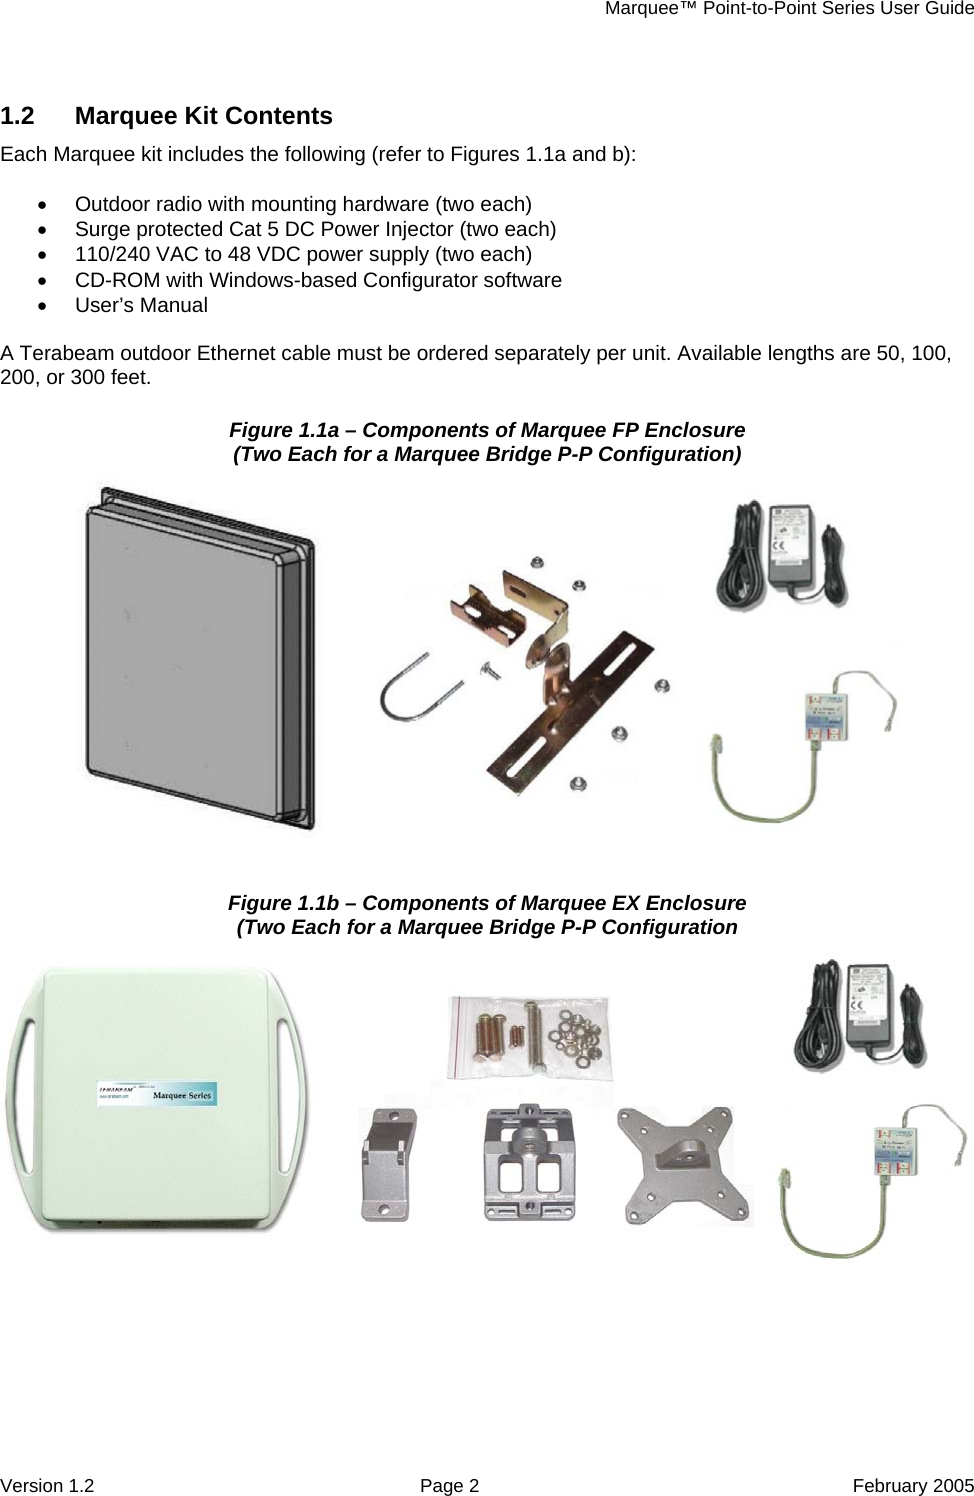     Marquee™ Point-to-Point Series User Guide 1.2  Marquee Kit Contents Each Marquee kit includes the following (refer to Figures 1.1a and b):  •  Outdoor radio with mounting hardware (two each) •  Surge protected Cat 5 DC Power Injector (two each) •  110/240 VAC to 48 VDC power supply (two each) •  CD-ROM with Windows-based Configurator software • User’s Manual  A Terabeam outdoor Ethernet cable must be ordered separately per unit. Available lengths are 50, 100, 200, or 300 feet. Figure 1.1a – Components of Marquee FP Enclosure (Two Each for a Marquee Bridge P-P Configuration)   Figure 1.1b – Components of Marquee EX Enclosure (Two Each for a Marquee Bridge P-P Configuration   Version 1.2  Page 2  February 2005 